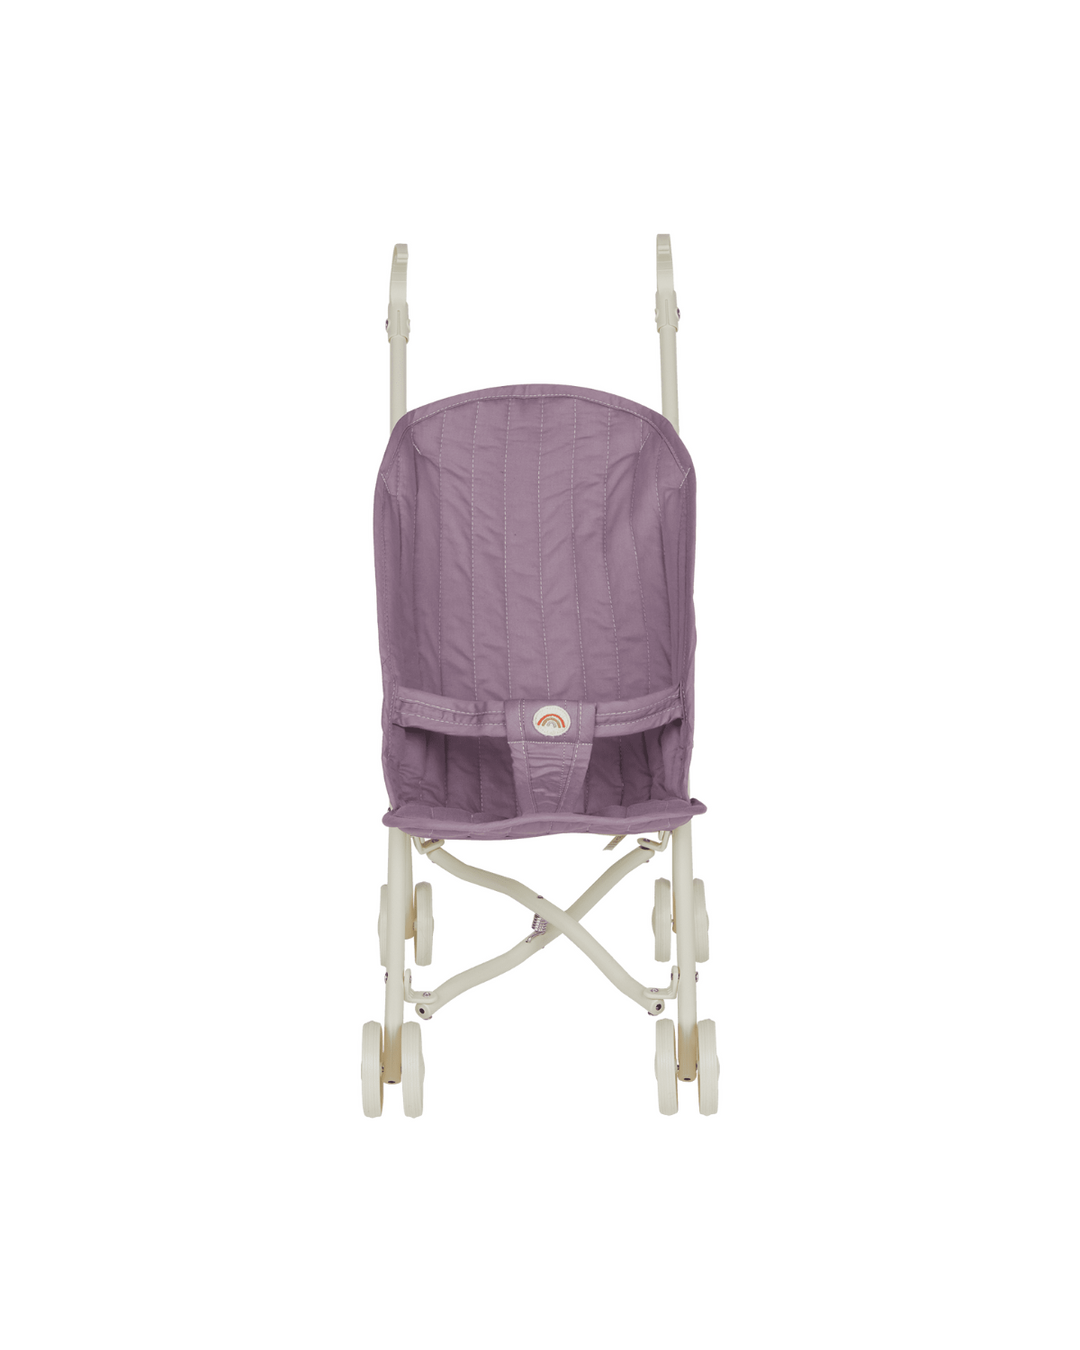 Stylish Lavender Sollie Stroller for Pretend Play